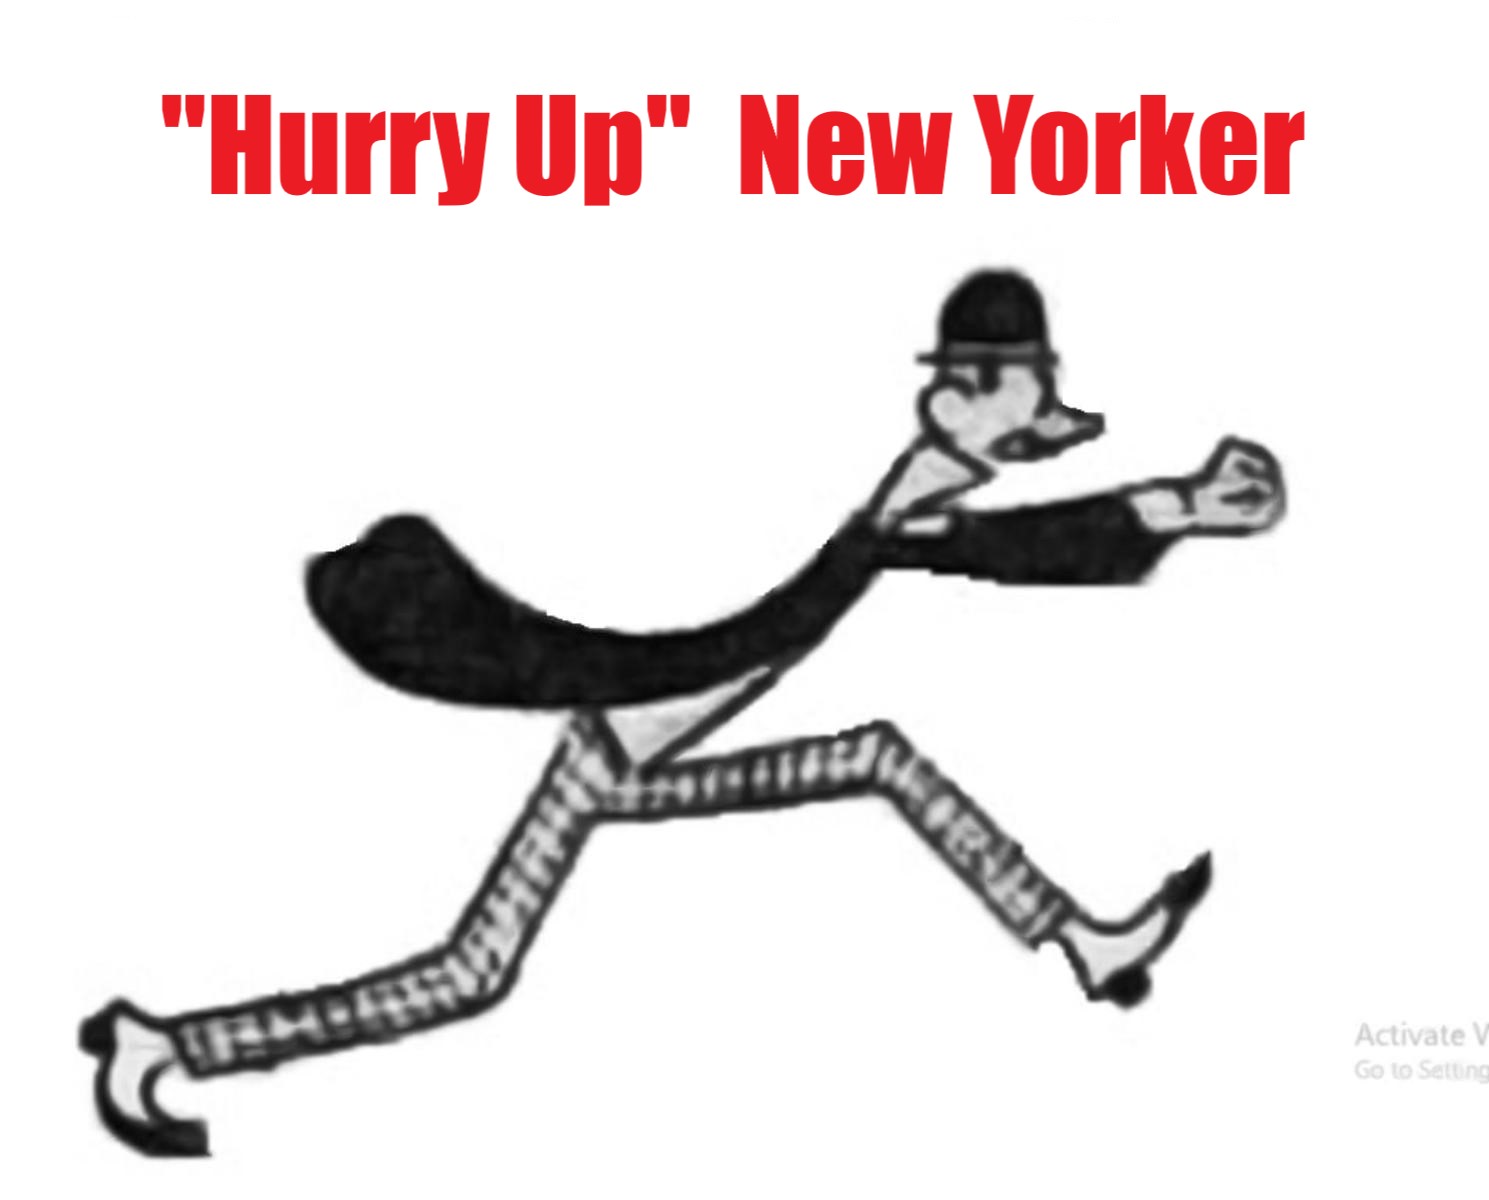 Book Cover For "Hurry Up" New Yorker